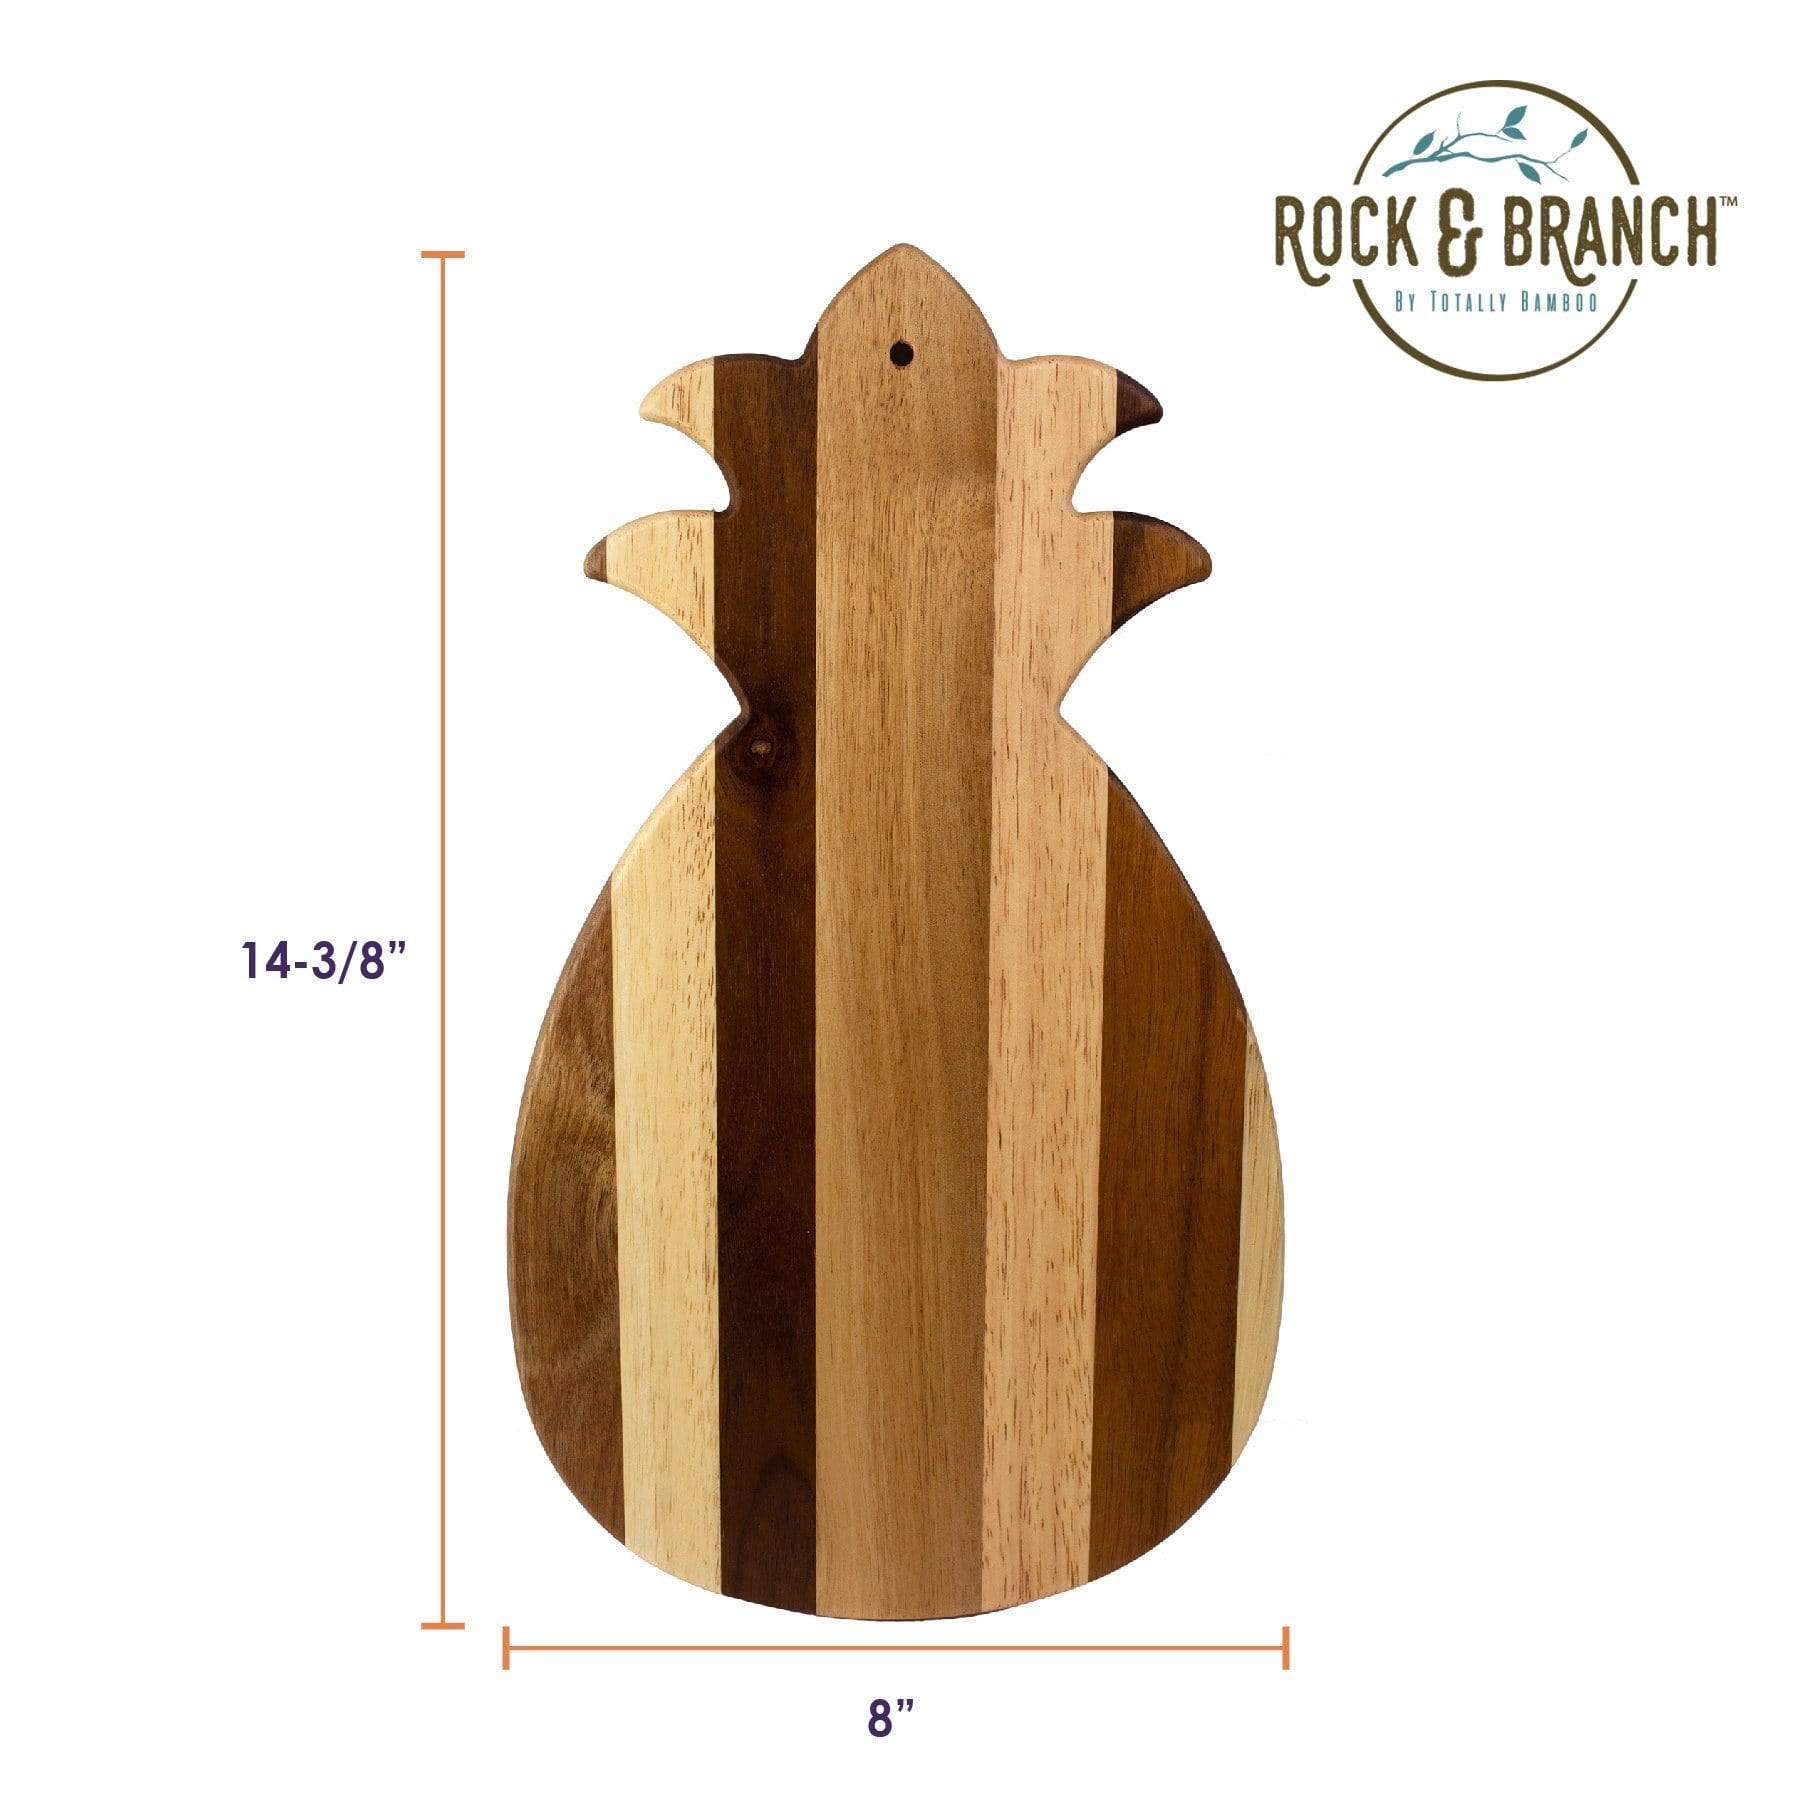 Pineapple Shaped Acacia Wood Serving and Cutting Board- Ideal Gift for  Tropical/Coastal Living- Friends and Family Members- Large, Heavy Duty,  Durable